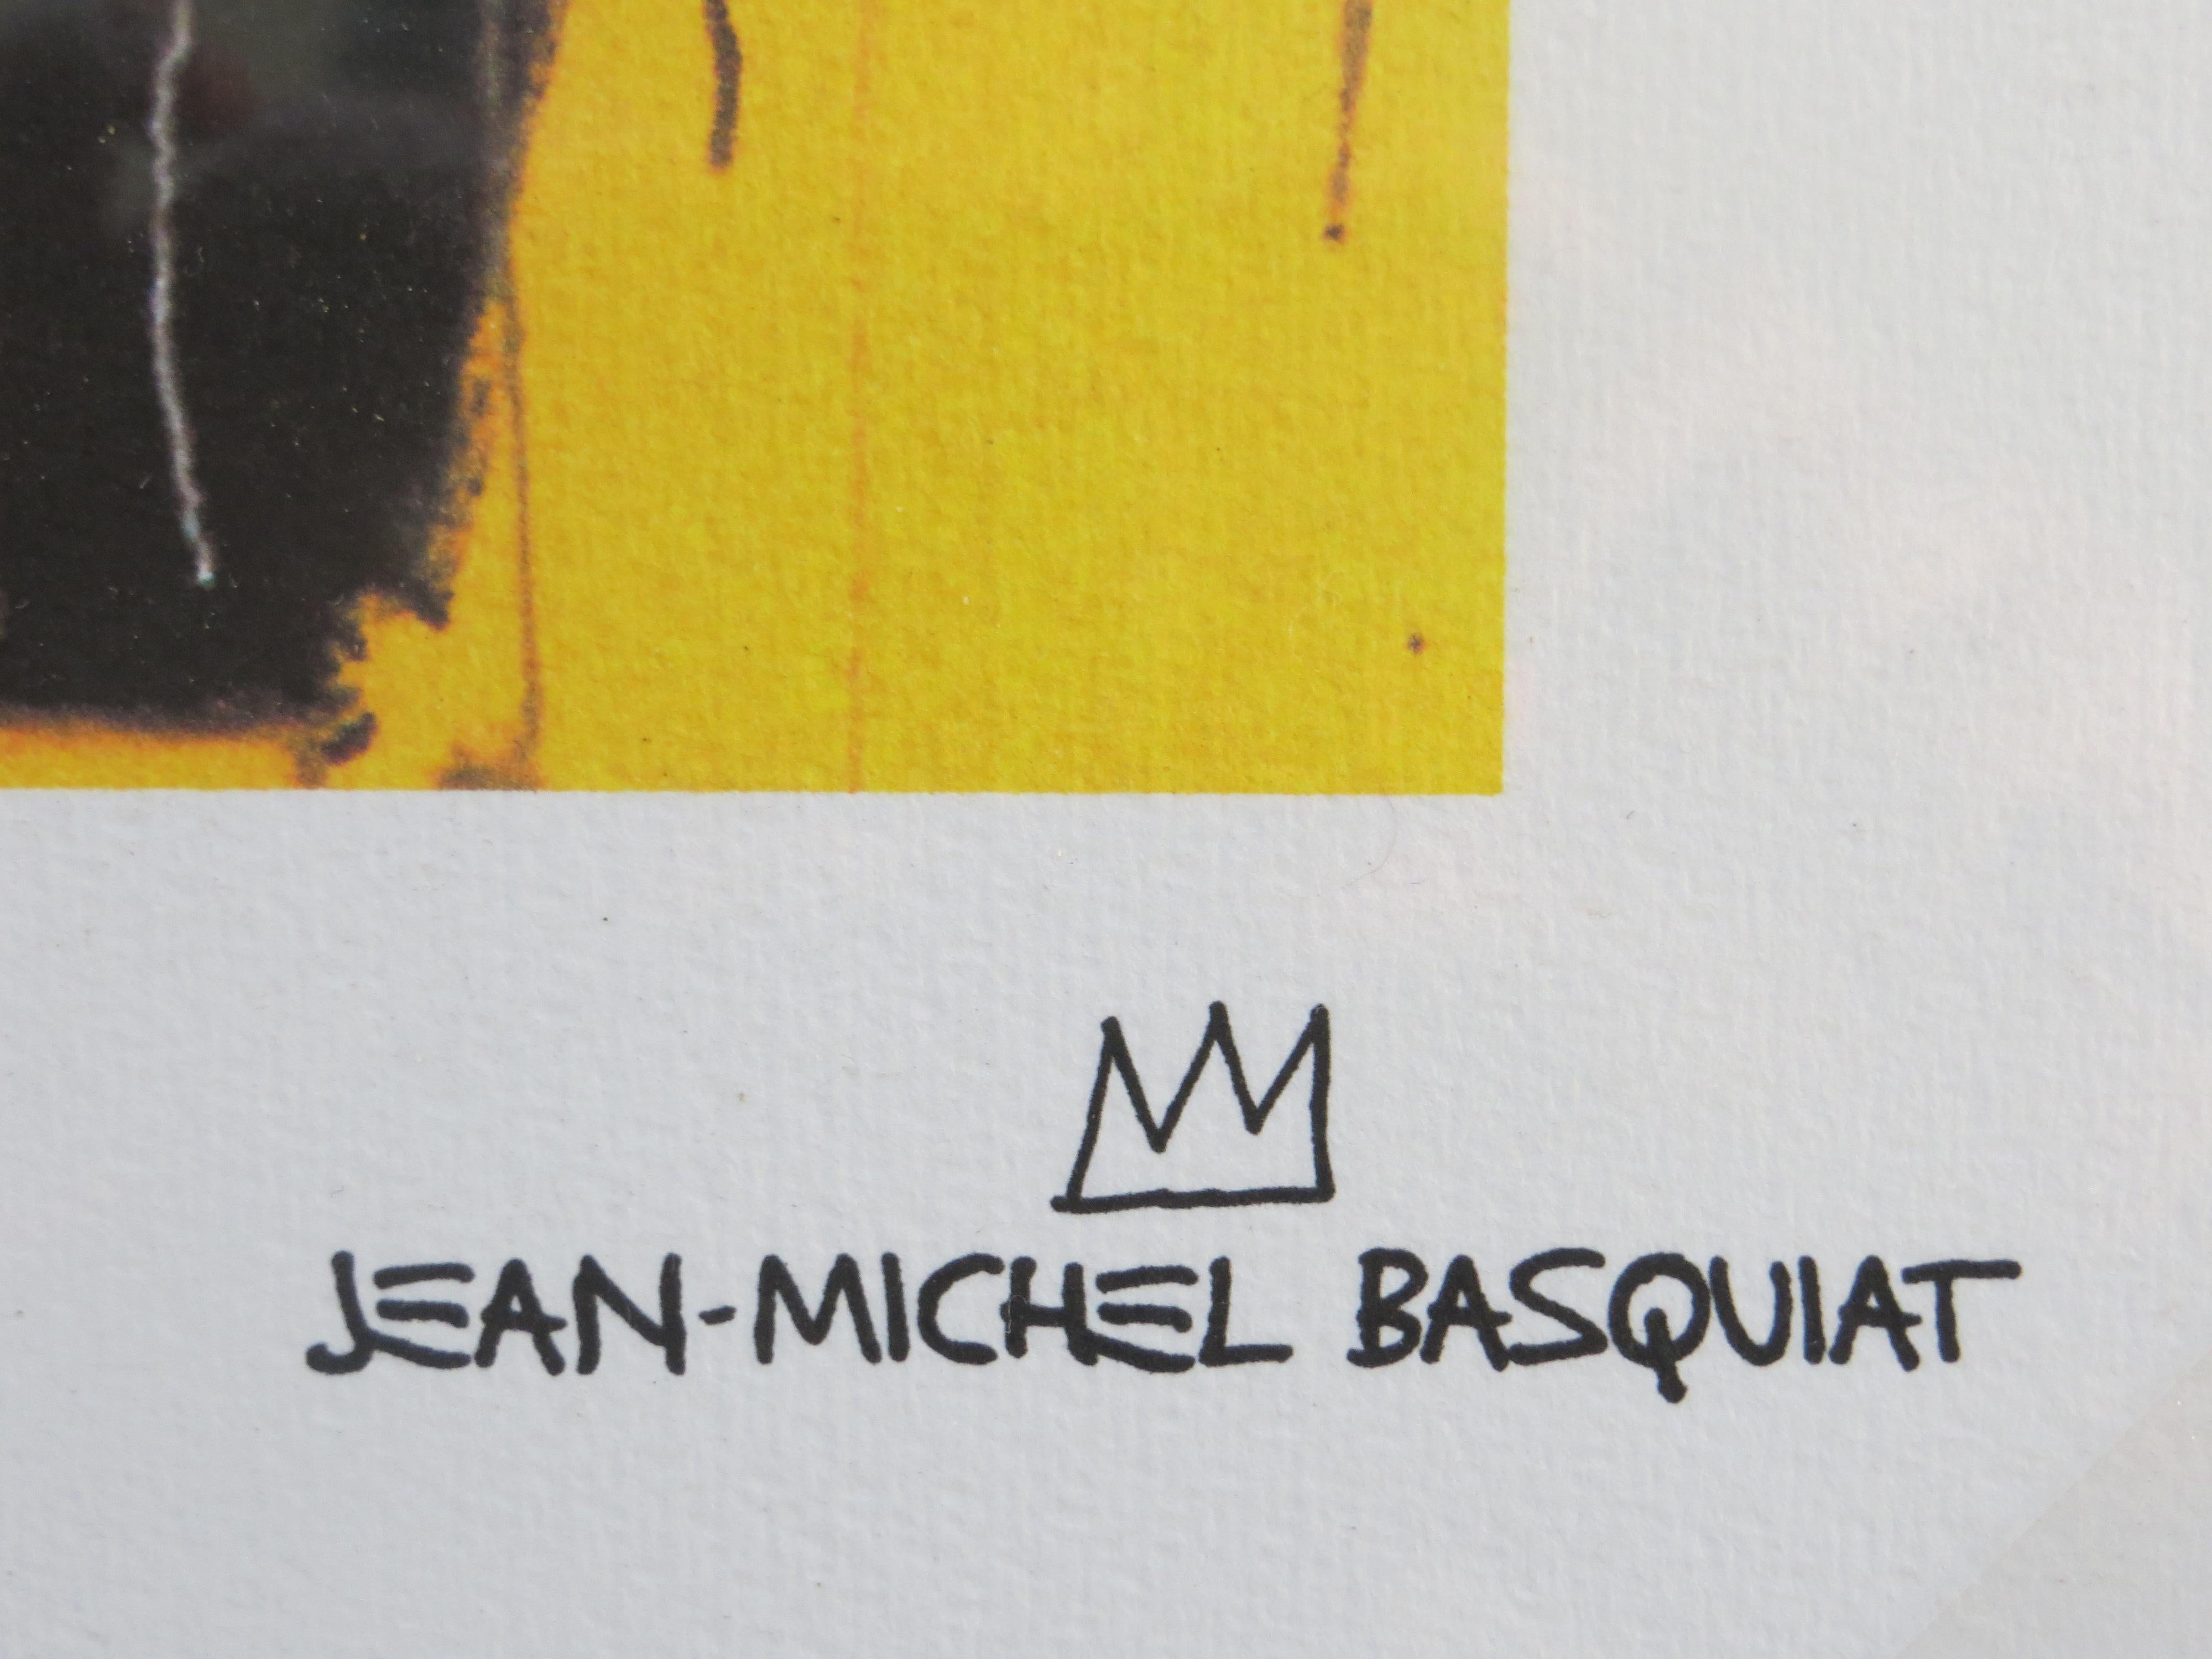 The Estate of Jean-Michel Basquiat,  Lithograph 56   /300 - Print by after Jean-Michel Basquiat